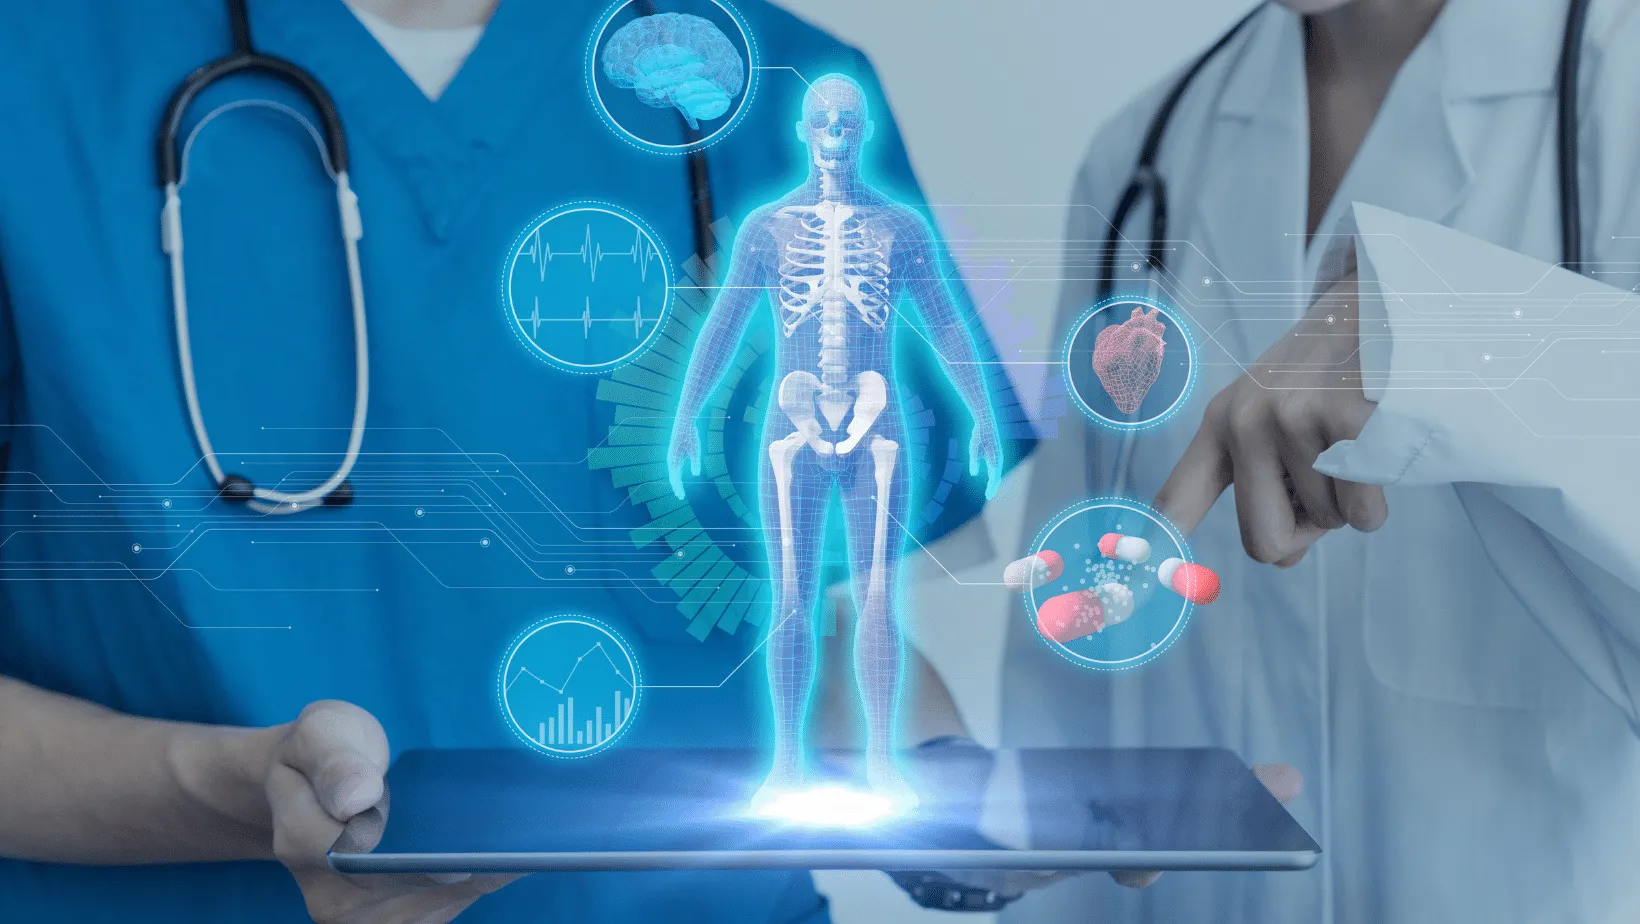 Healthcare professionals using a tablet to interact with a futuristic holographic display of a human body and various health data, indicating advanced medical technology.